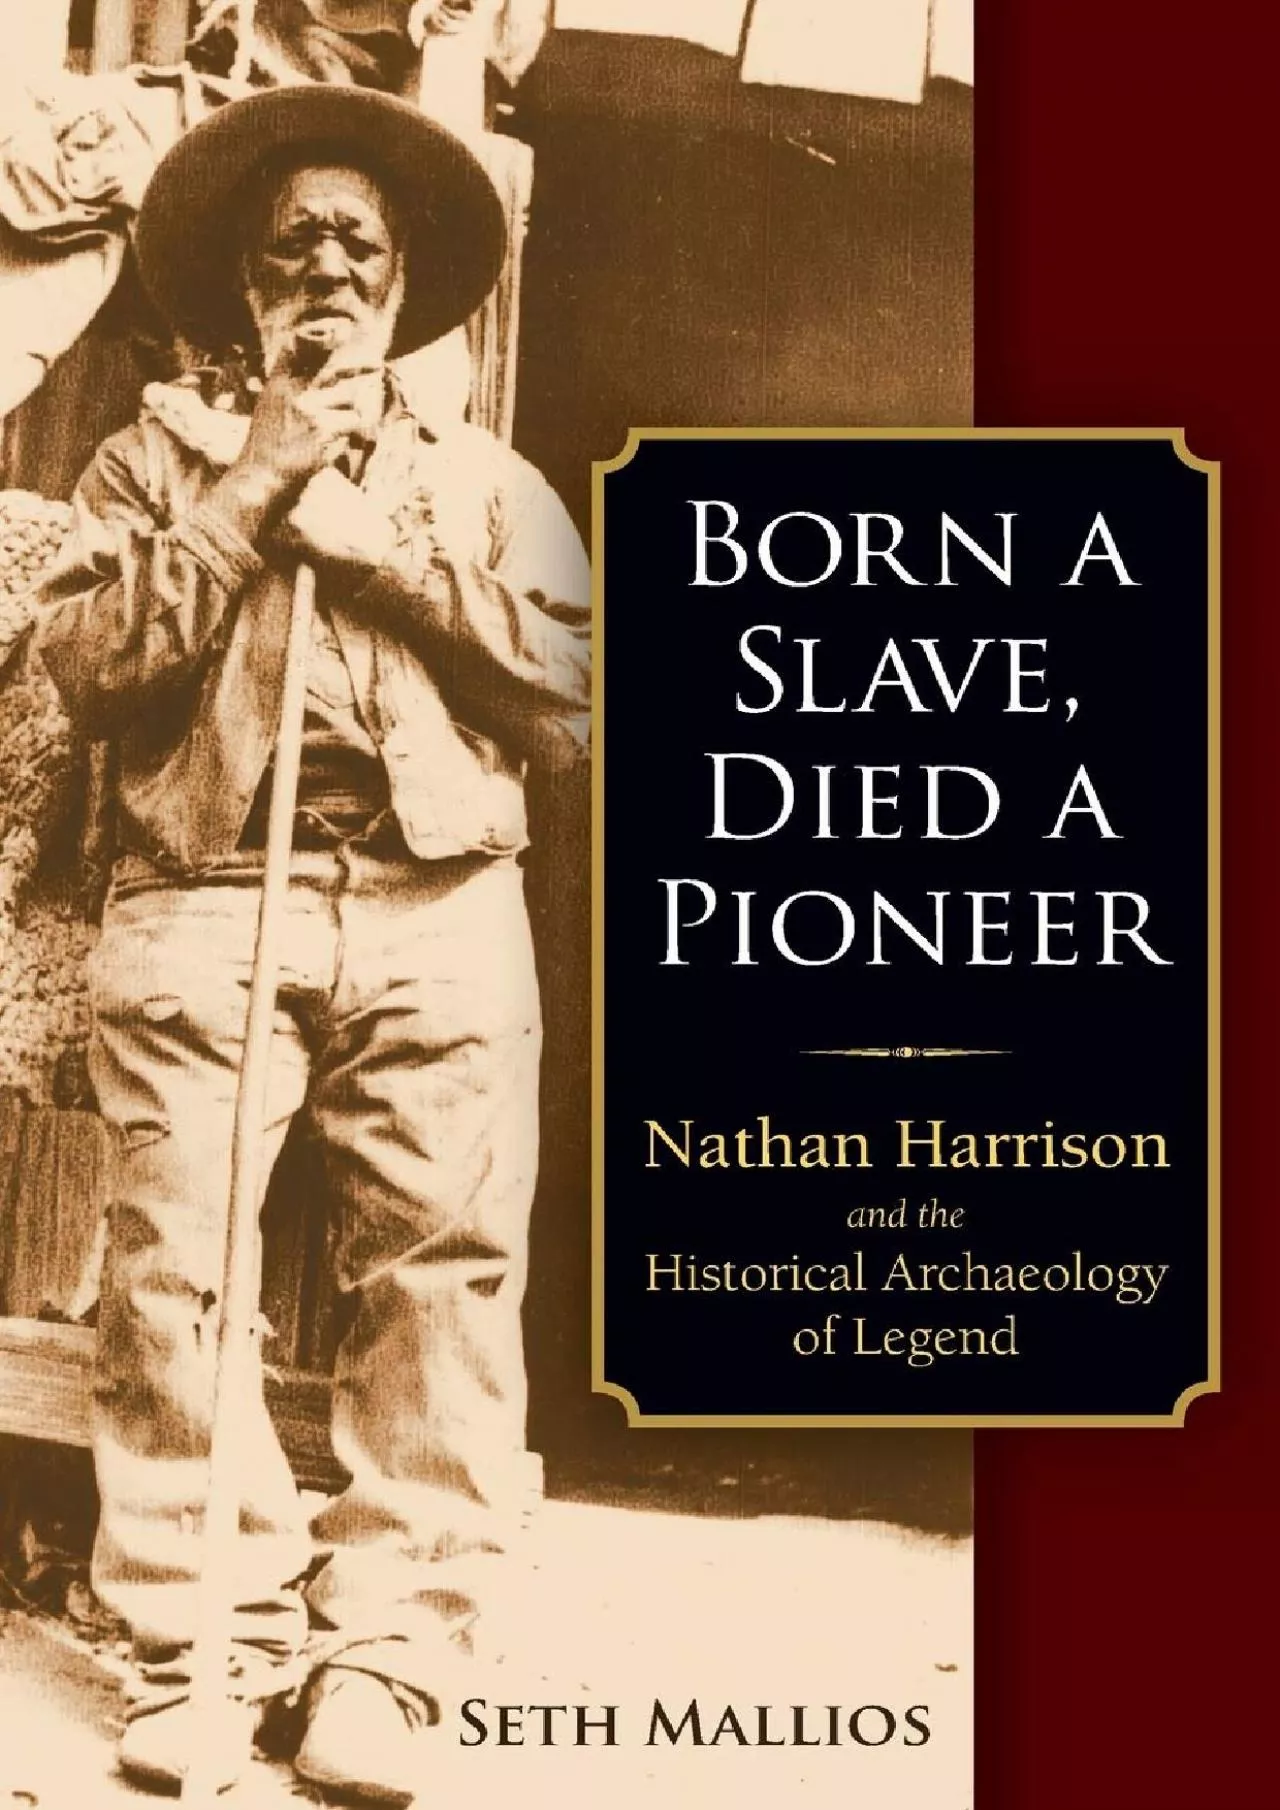 (DOWNLOAD)-Born a Slave, Died a Pioneer: Nathan Harrison and the Historical Archaeology